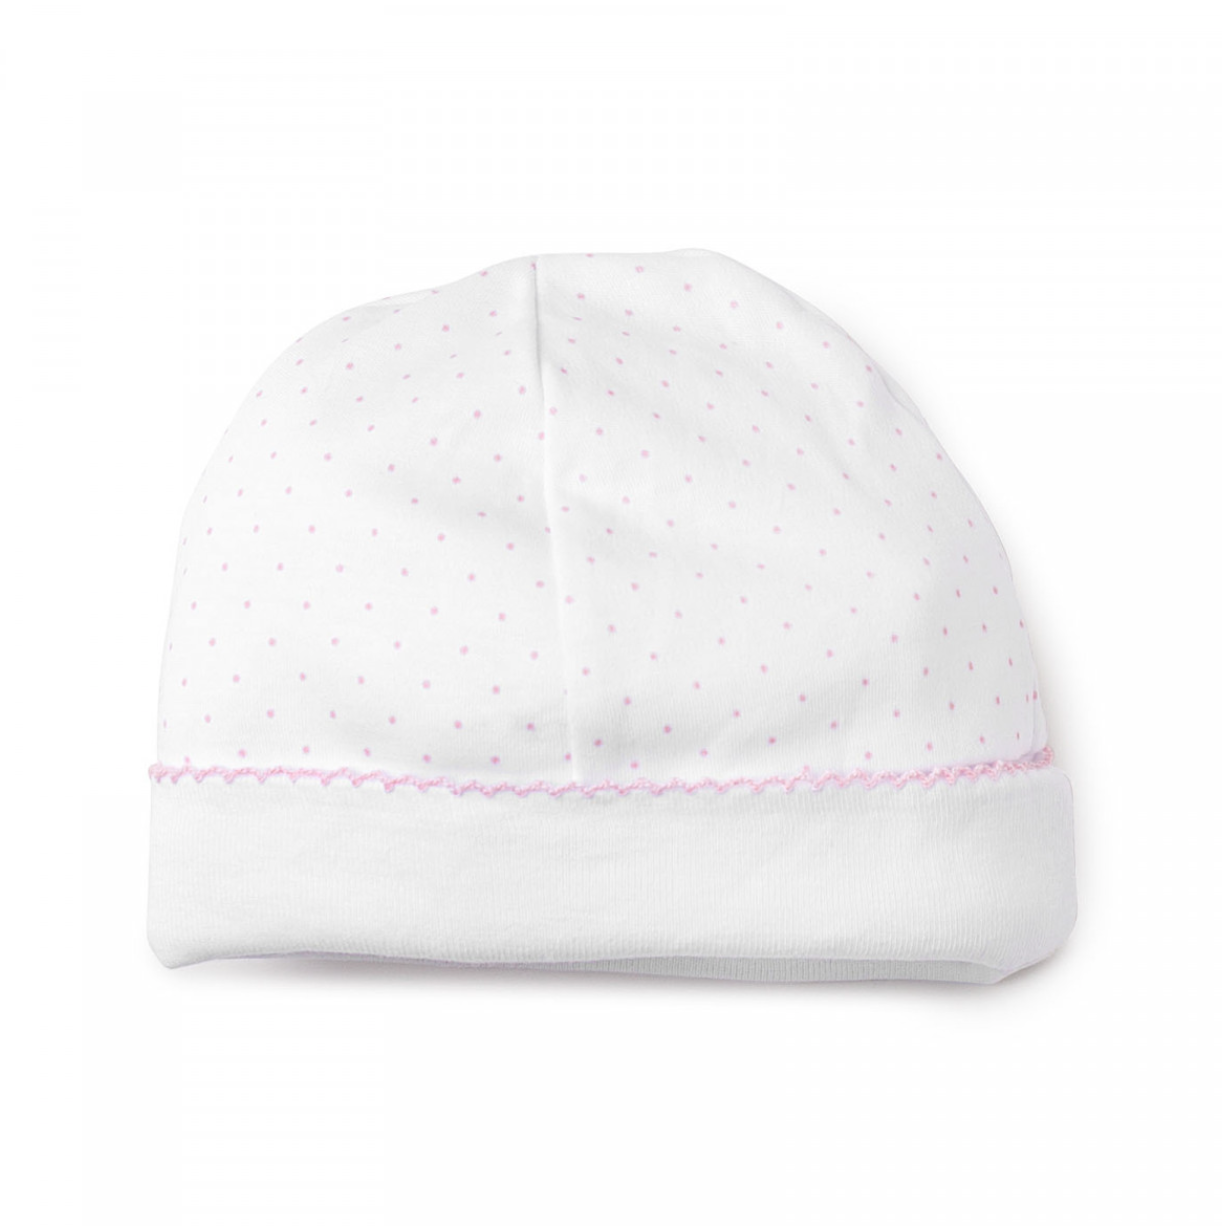 Polka Dot Hat, White with Pink